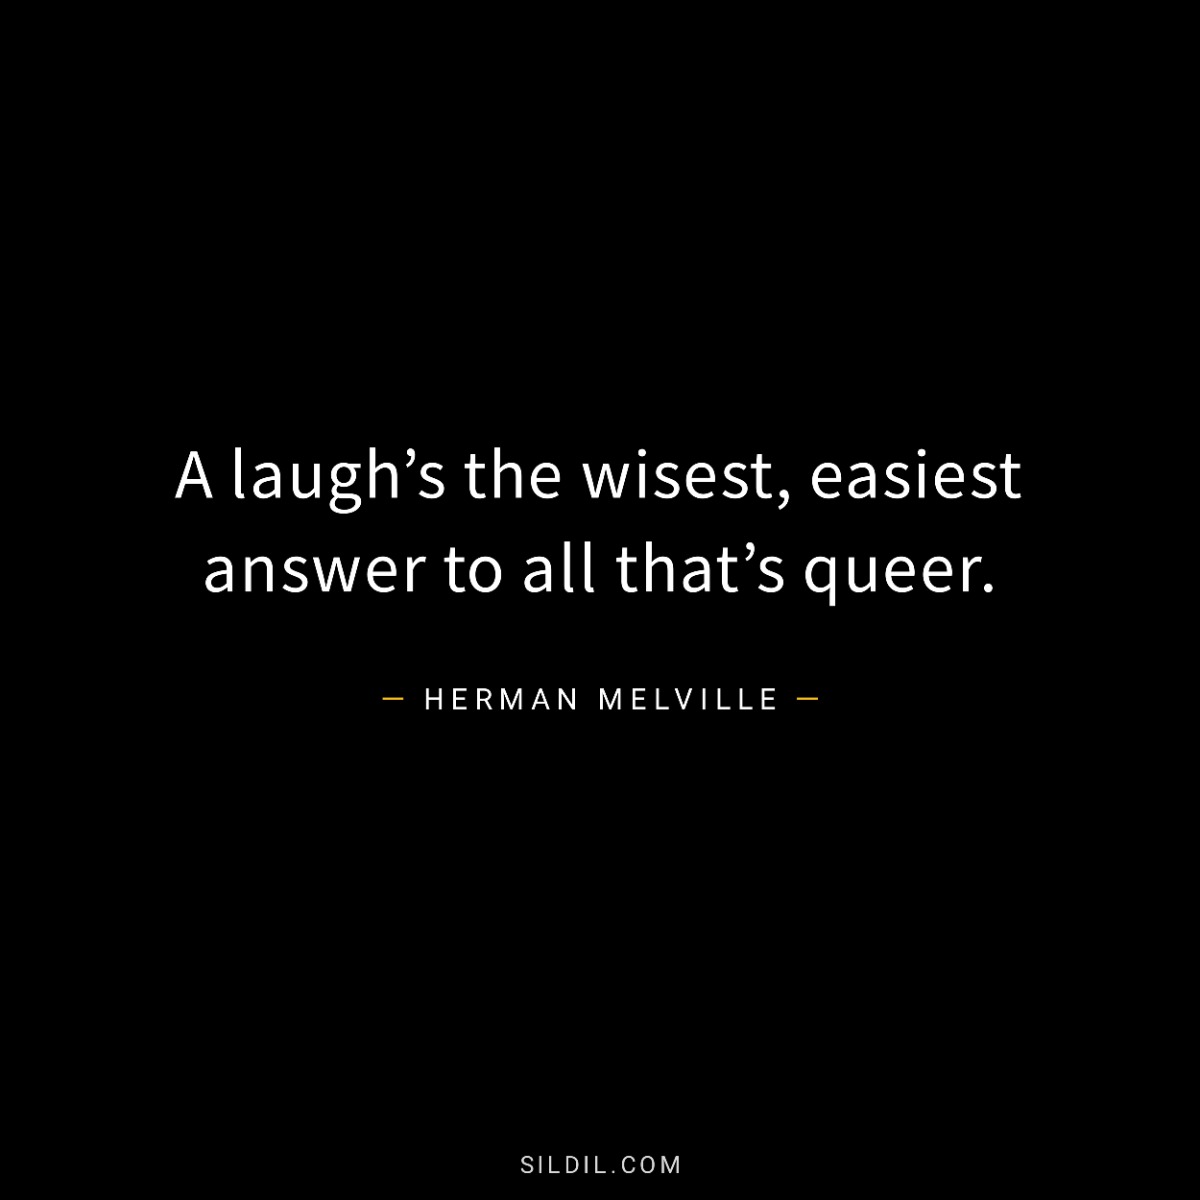 A laugh’s the wisest, easiest answer to all that’s queer.